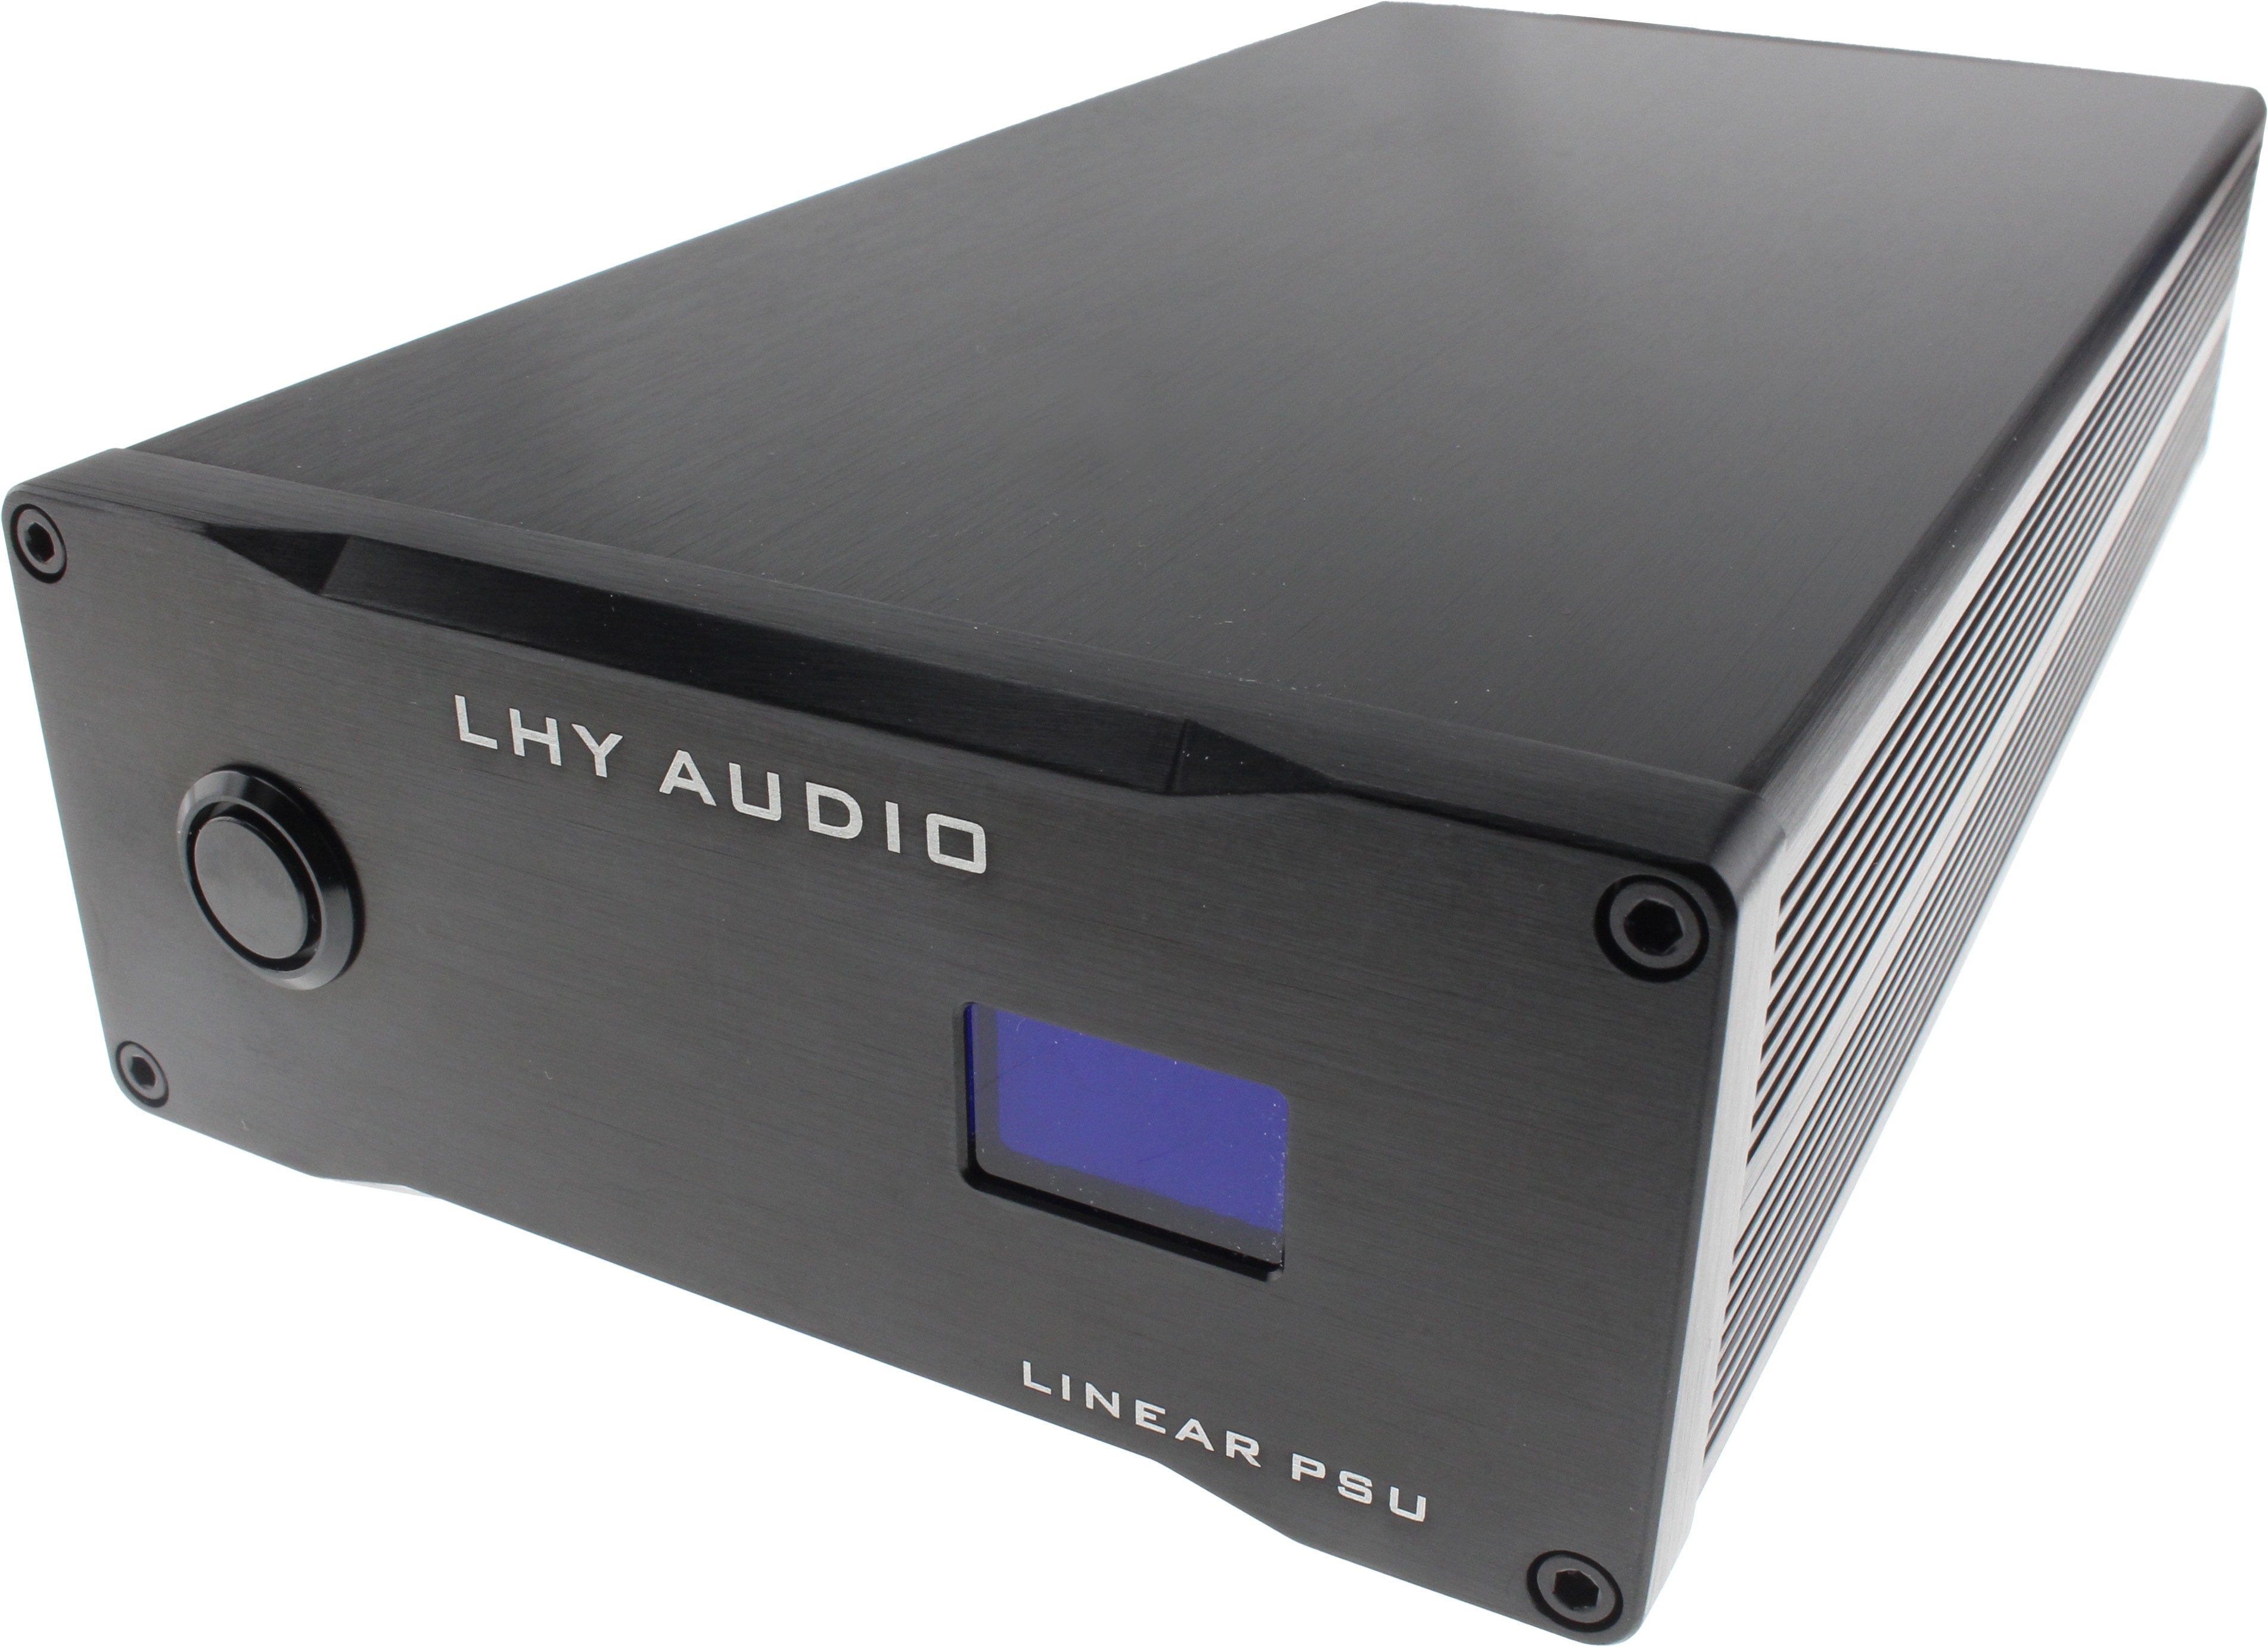 LHY AUDIO LPS80VA PREMIUM Linear Regulated Low Noise Power Supply 230V to 12V 2.5A 80VA